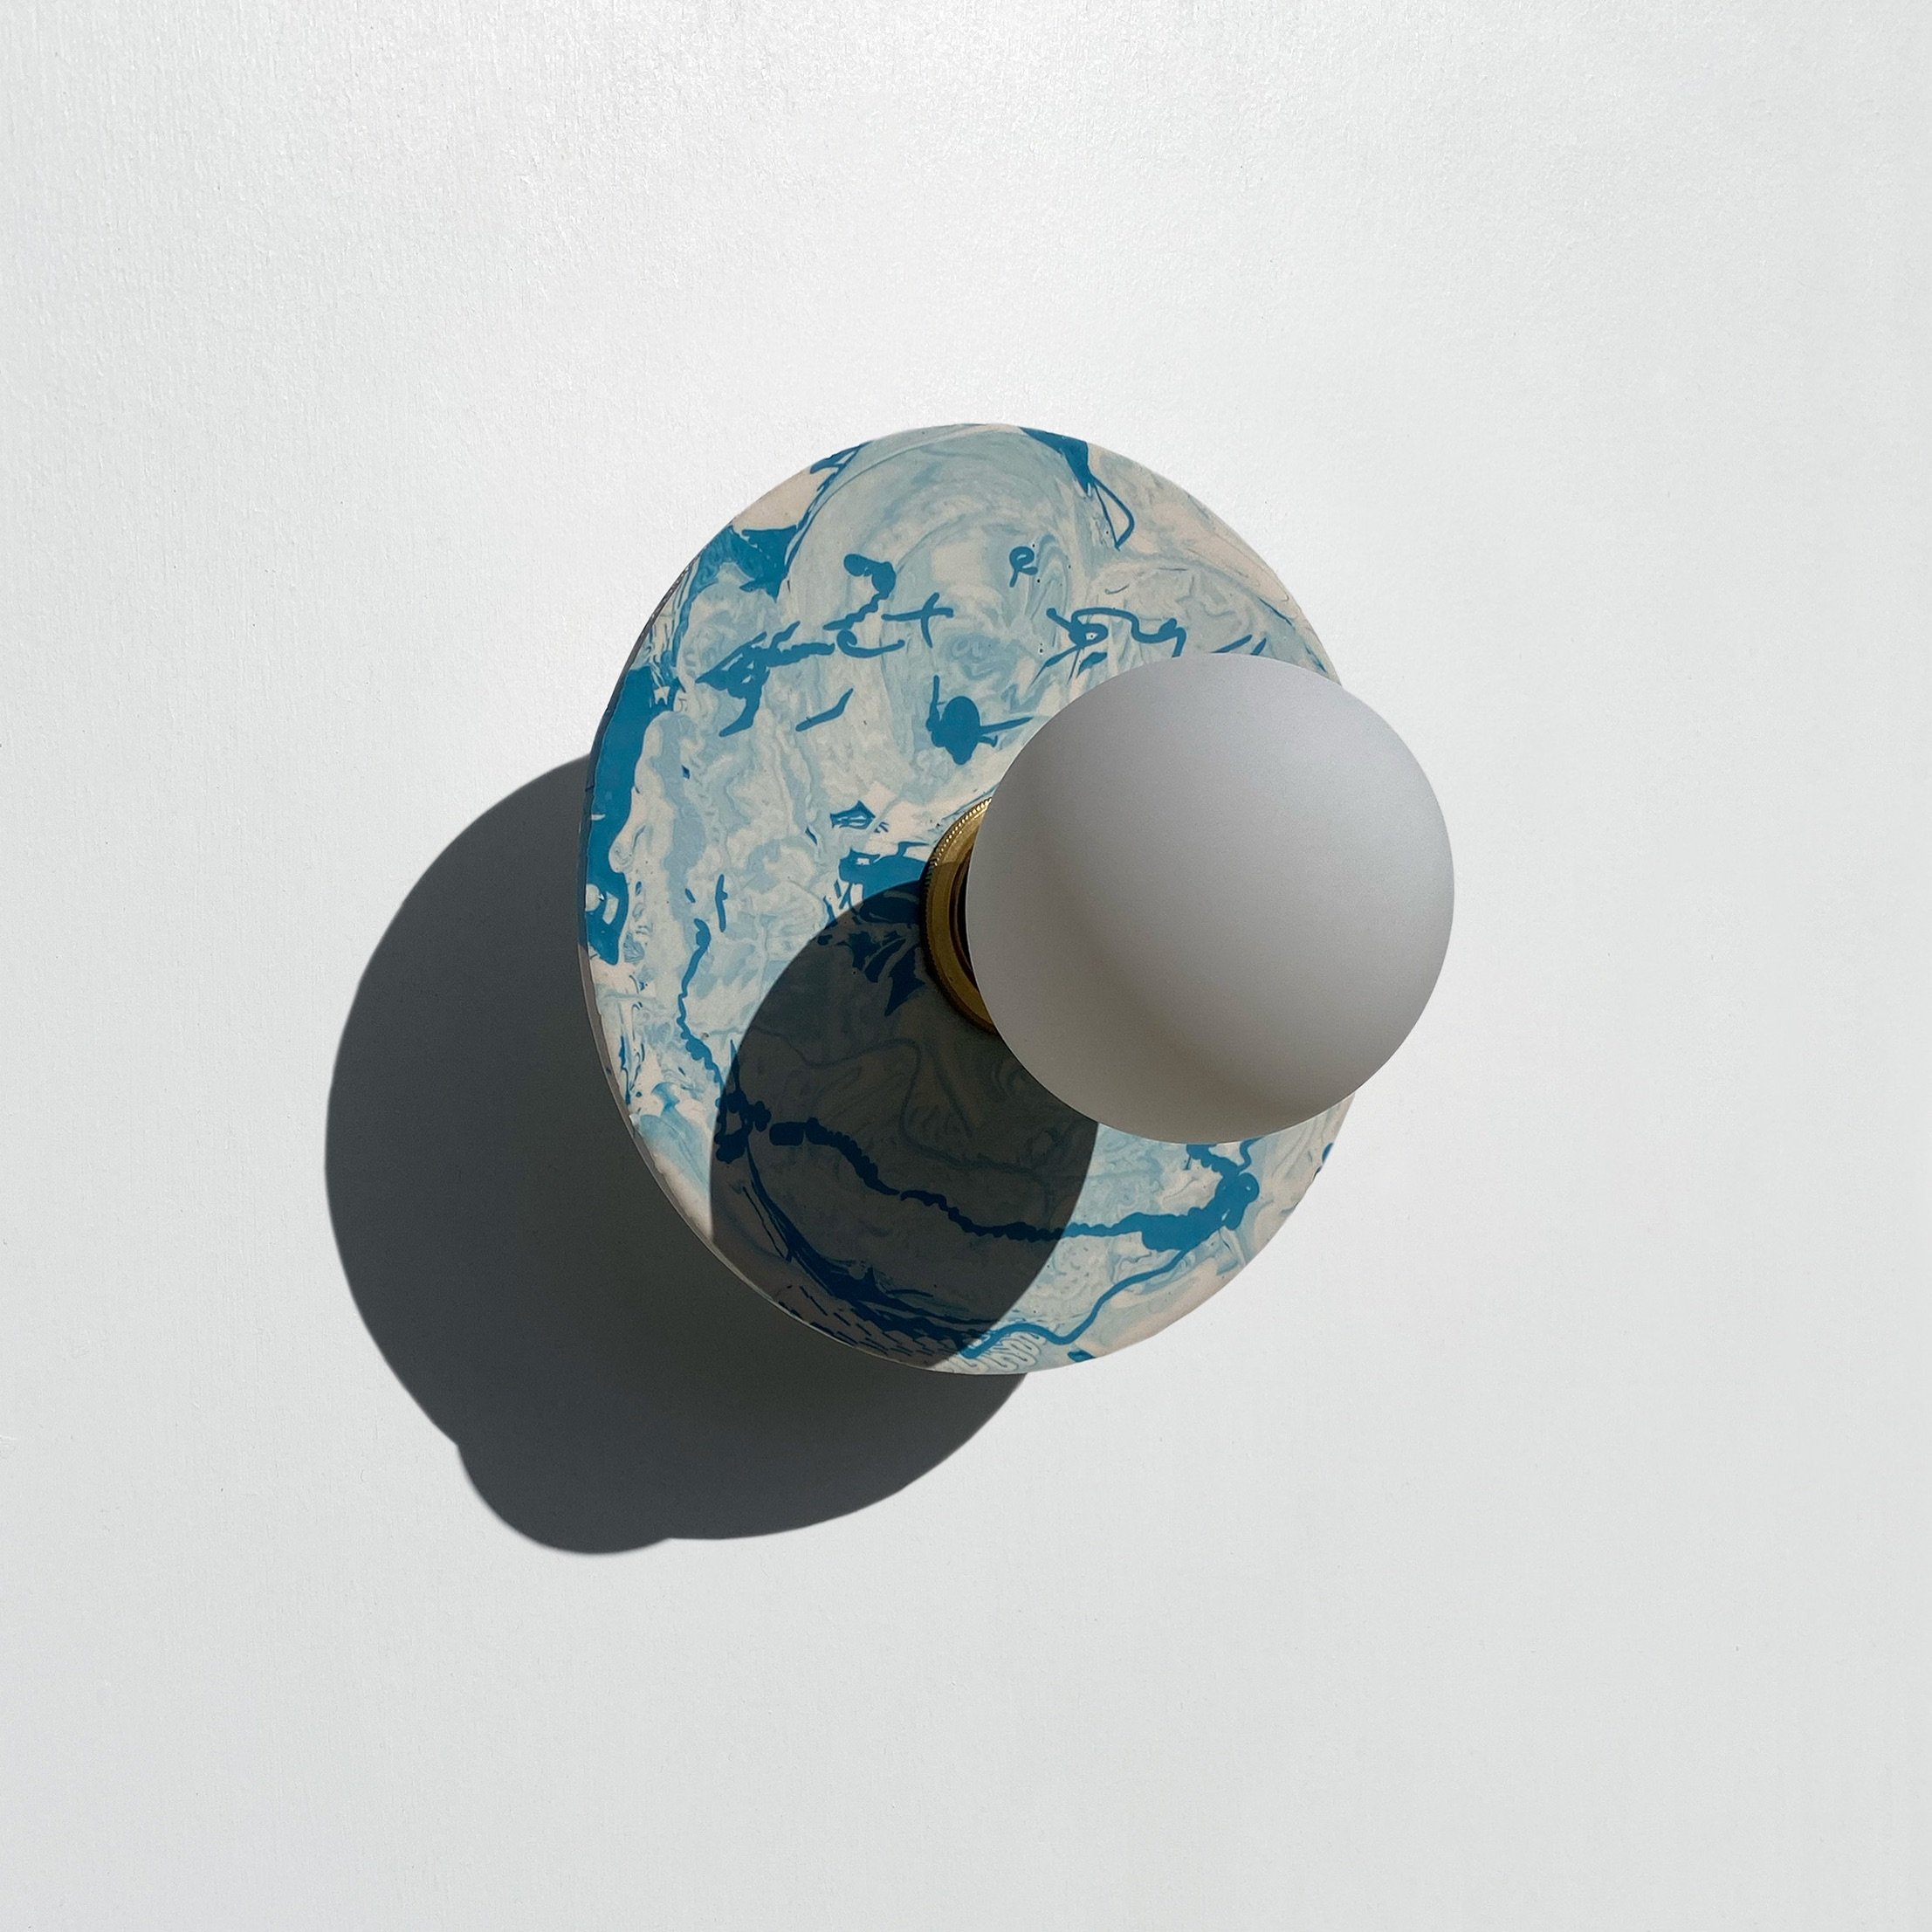 One of my favourites that is still available in the Sample Sale. Paired with our beautiful frosted Porcelain II bulb💡 

Blue and white marbled wall light 🔵⚪️🔵⚪️